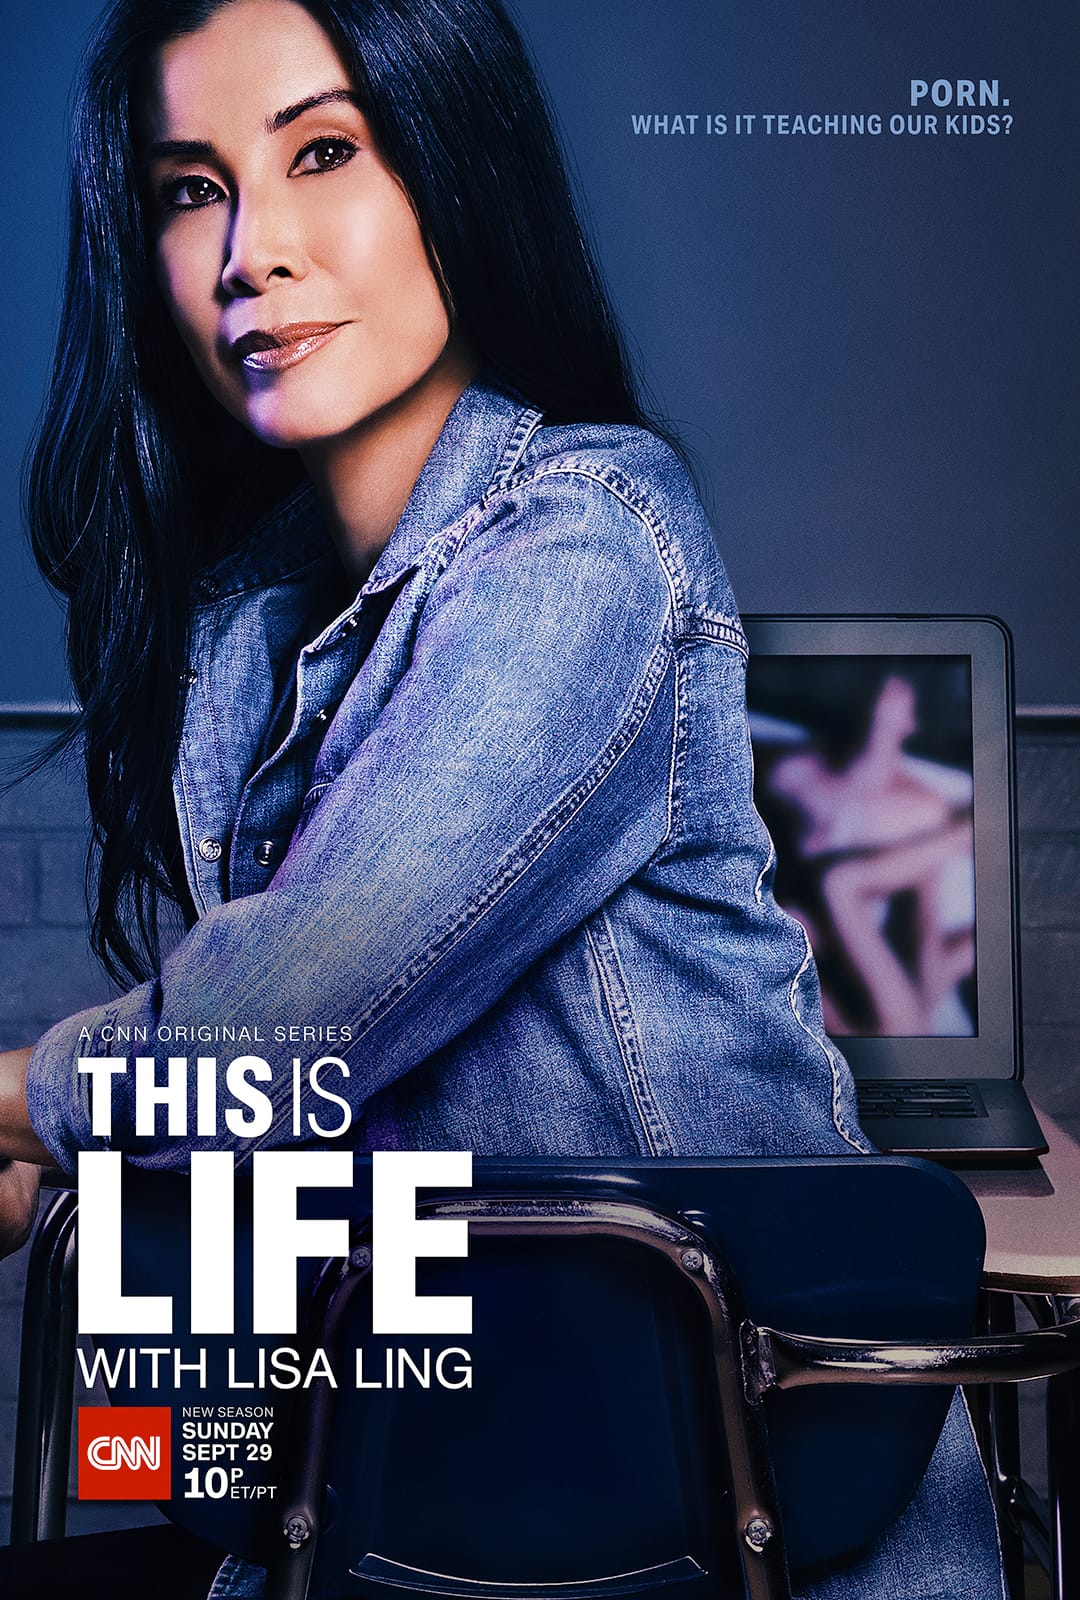 Lost Tv Show Porn - This is Life with Lisa Ling - CNN Creative Marketing